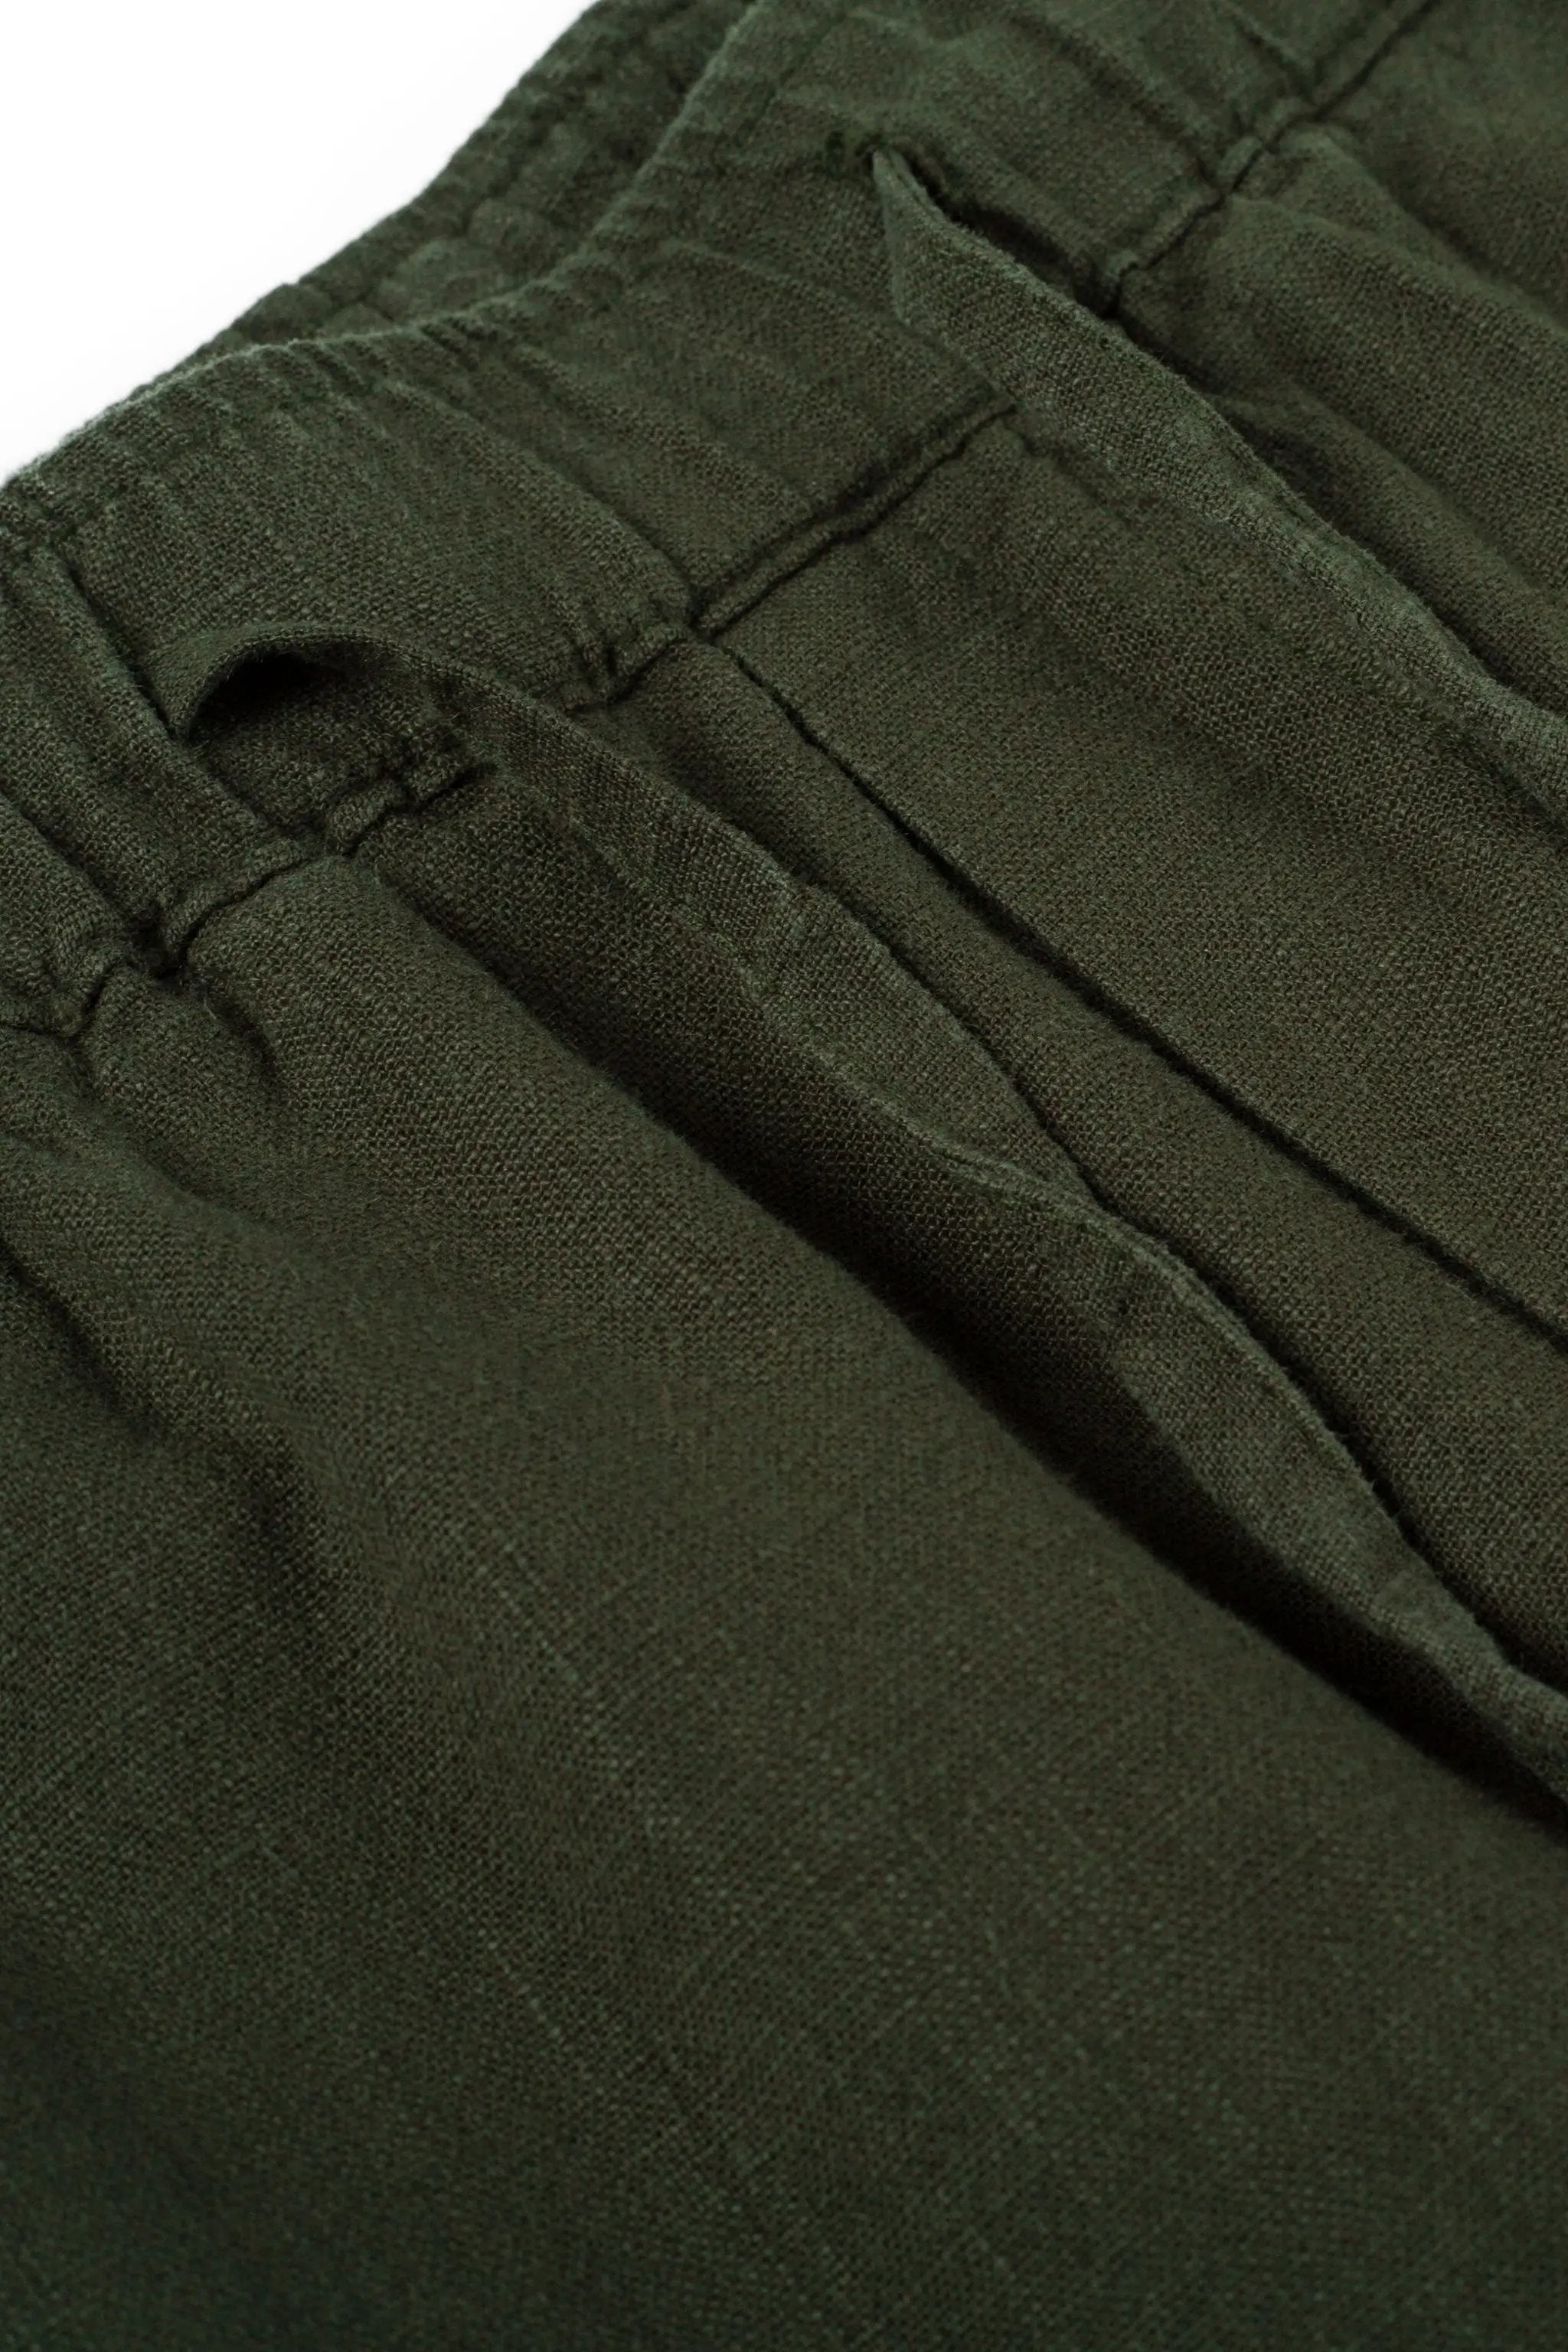 a close up of a pair of pants